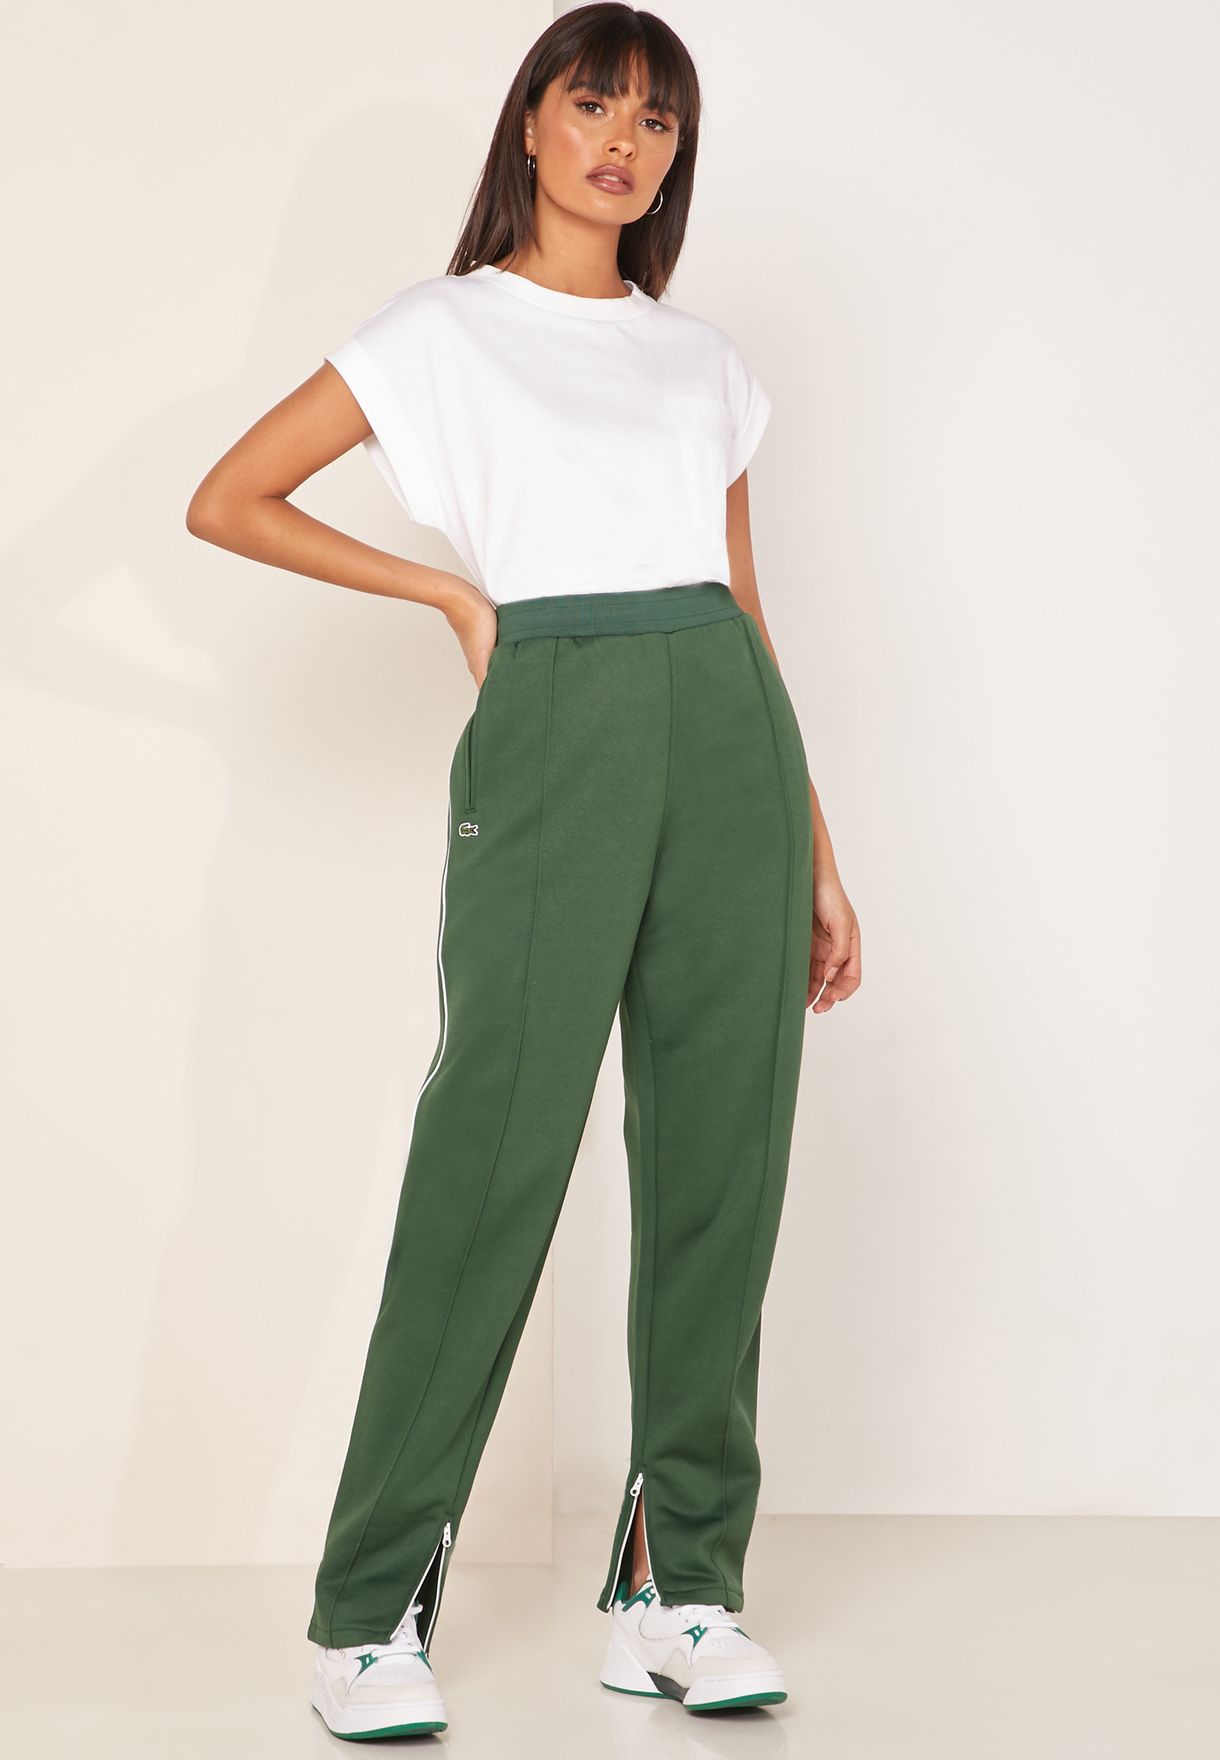 lacoste track pants womens